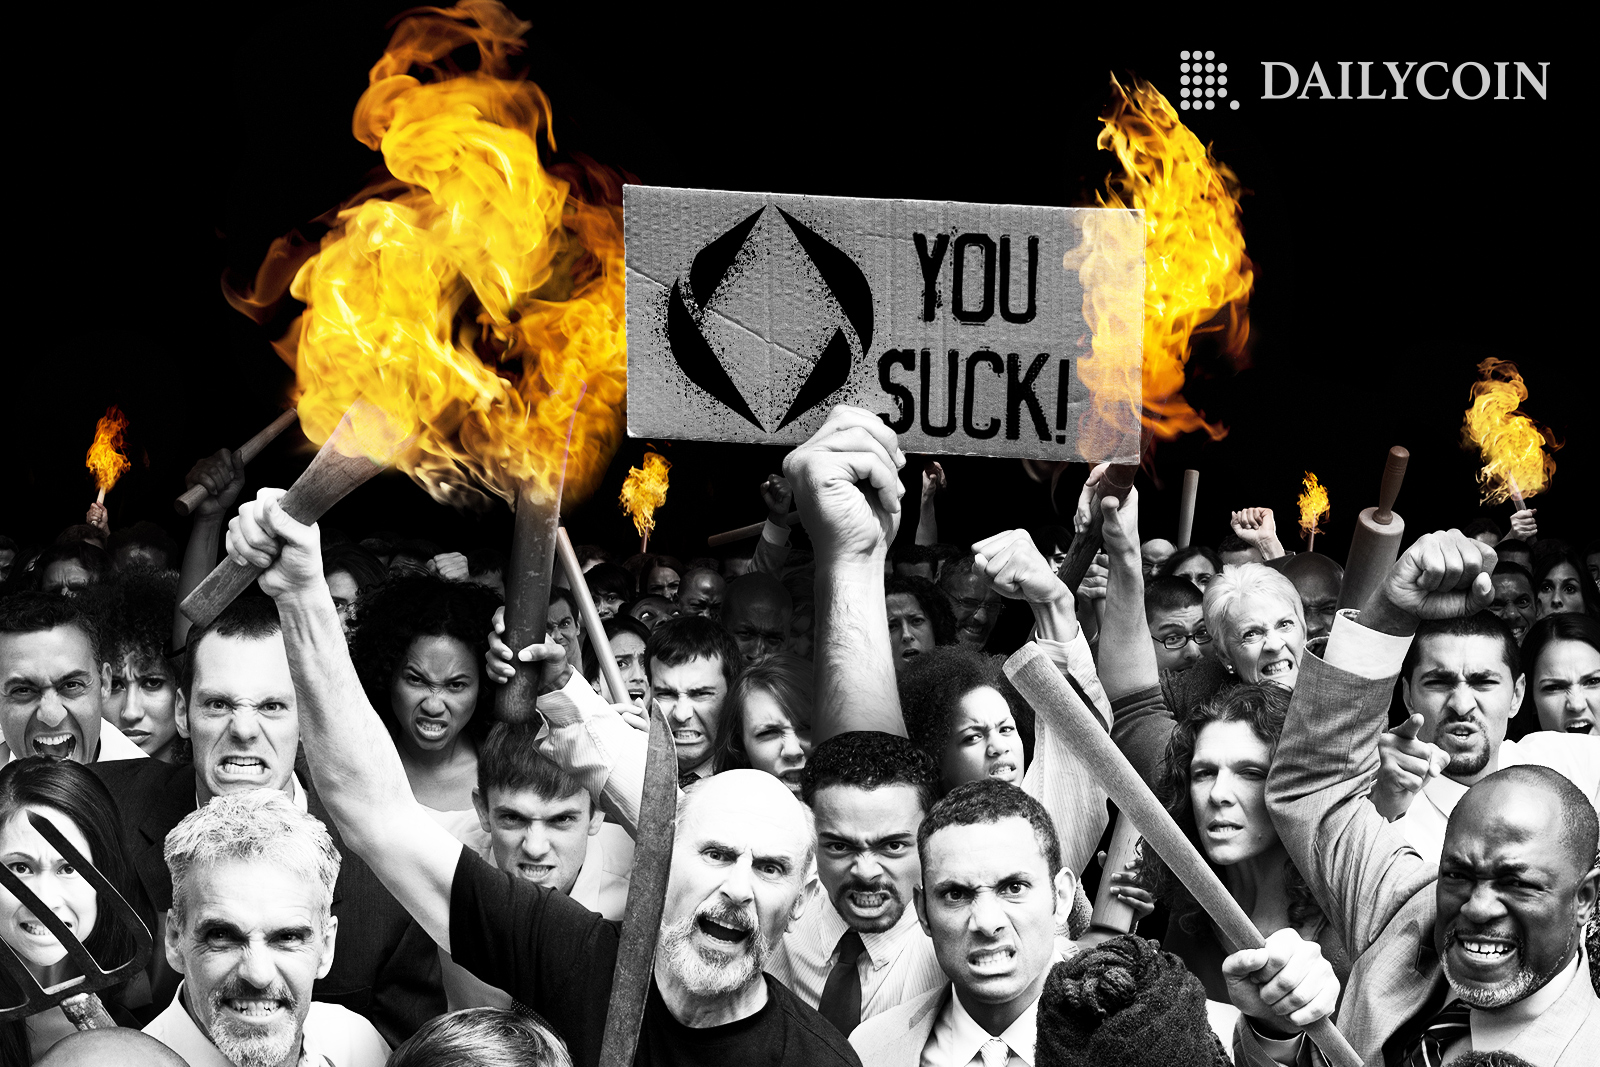 A group of angry people hold a sign saying "You Suck"